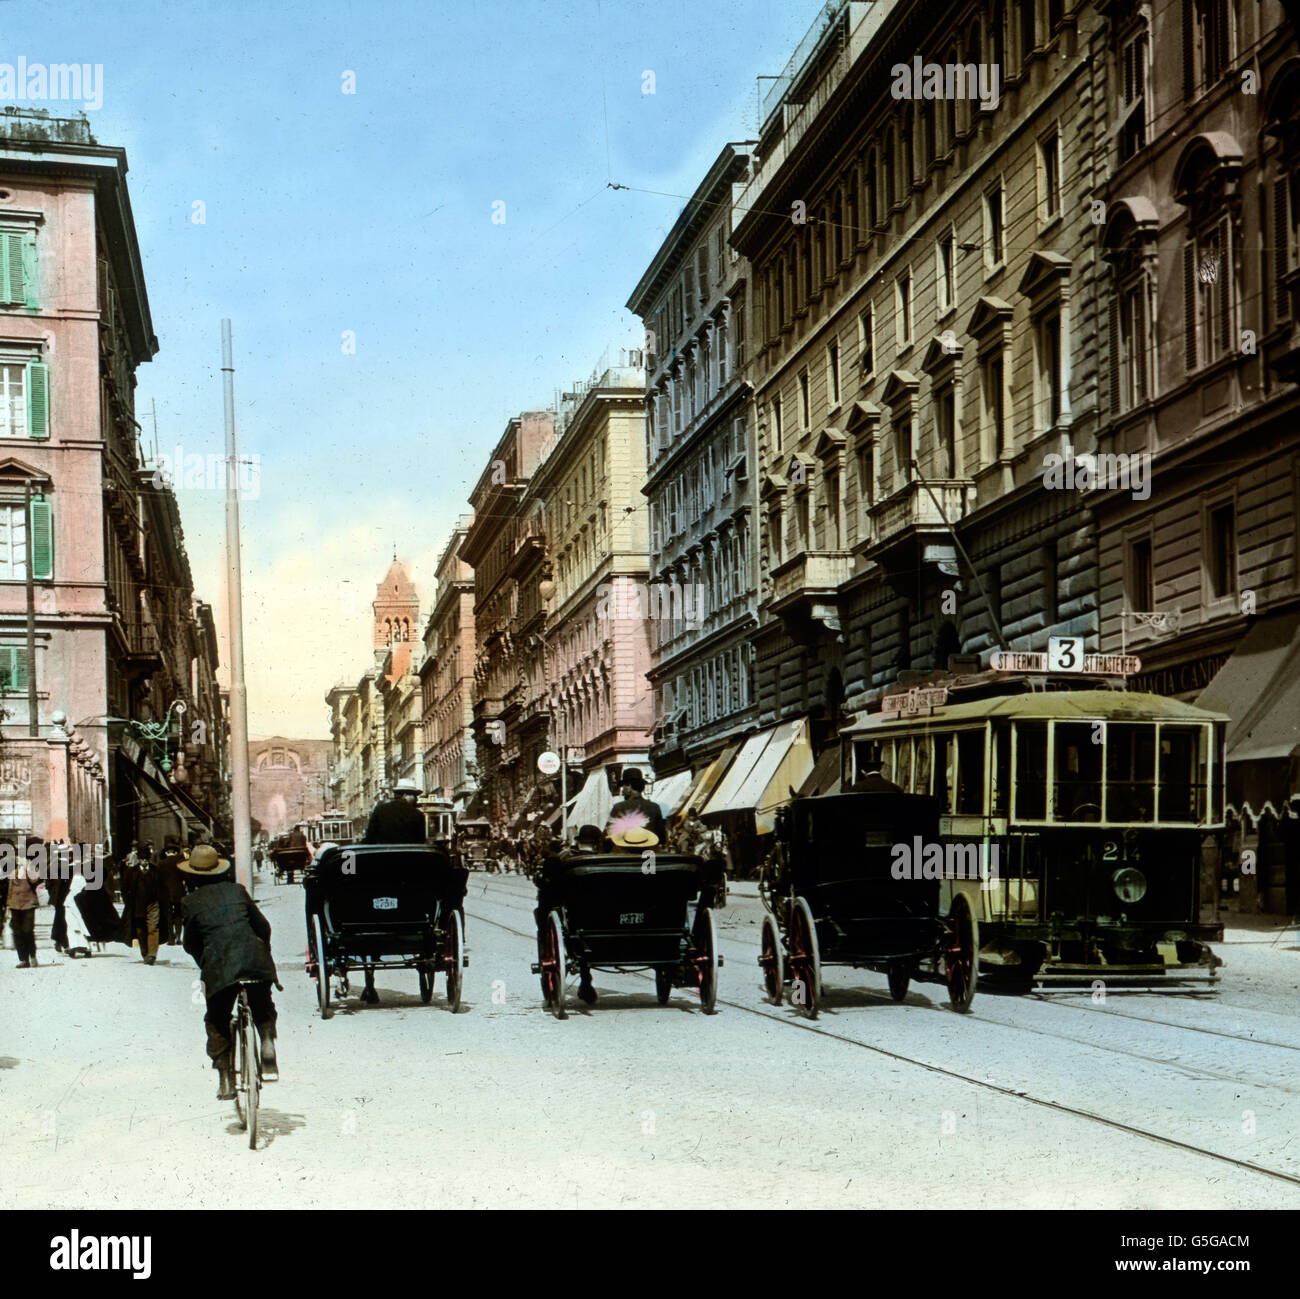 Die Via Nazionale in Rom. The Via Nazionale in the city of Rome. street, people, shops, tram,  bicycle, street life, city life, avenue, Europe, Italy, Rome, history, historical, 1910s, 1920s, 20th century, archive, Carl Simon, hand-coloured glass slide Stock Photo